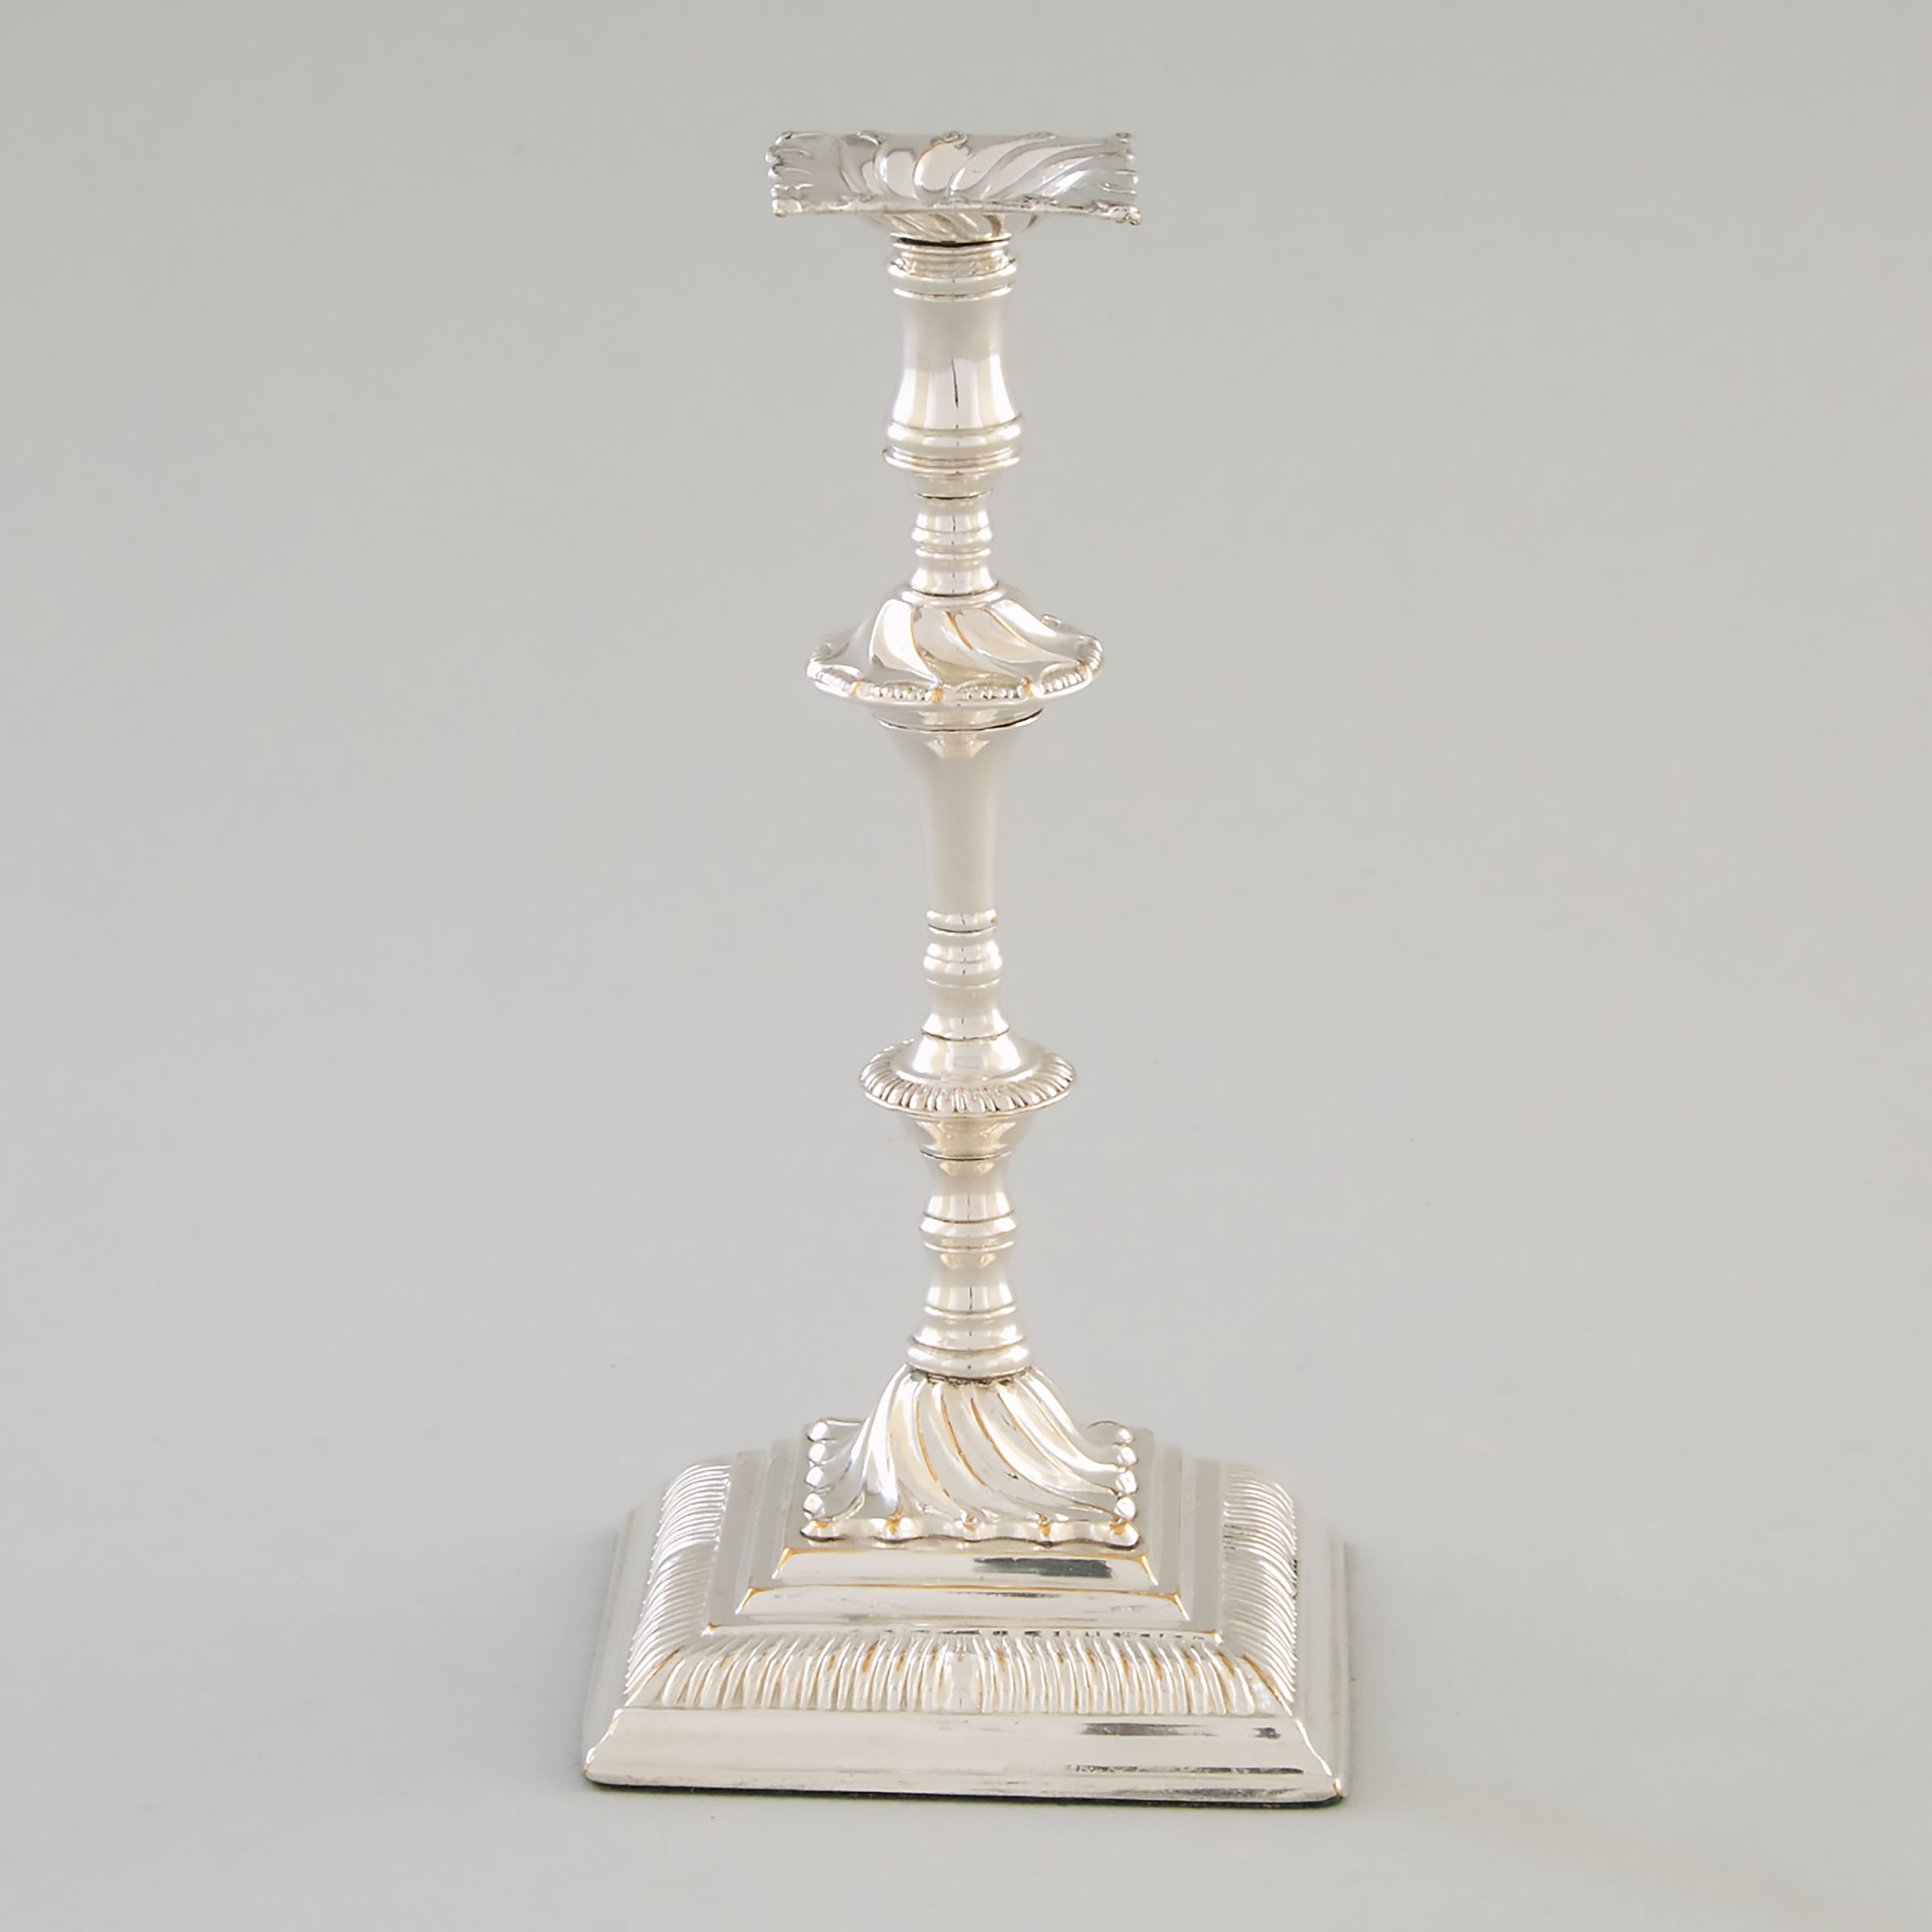 Old Sheffield Plate Taperstick, late 18th century